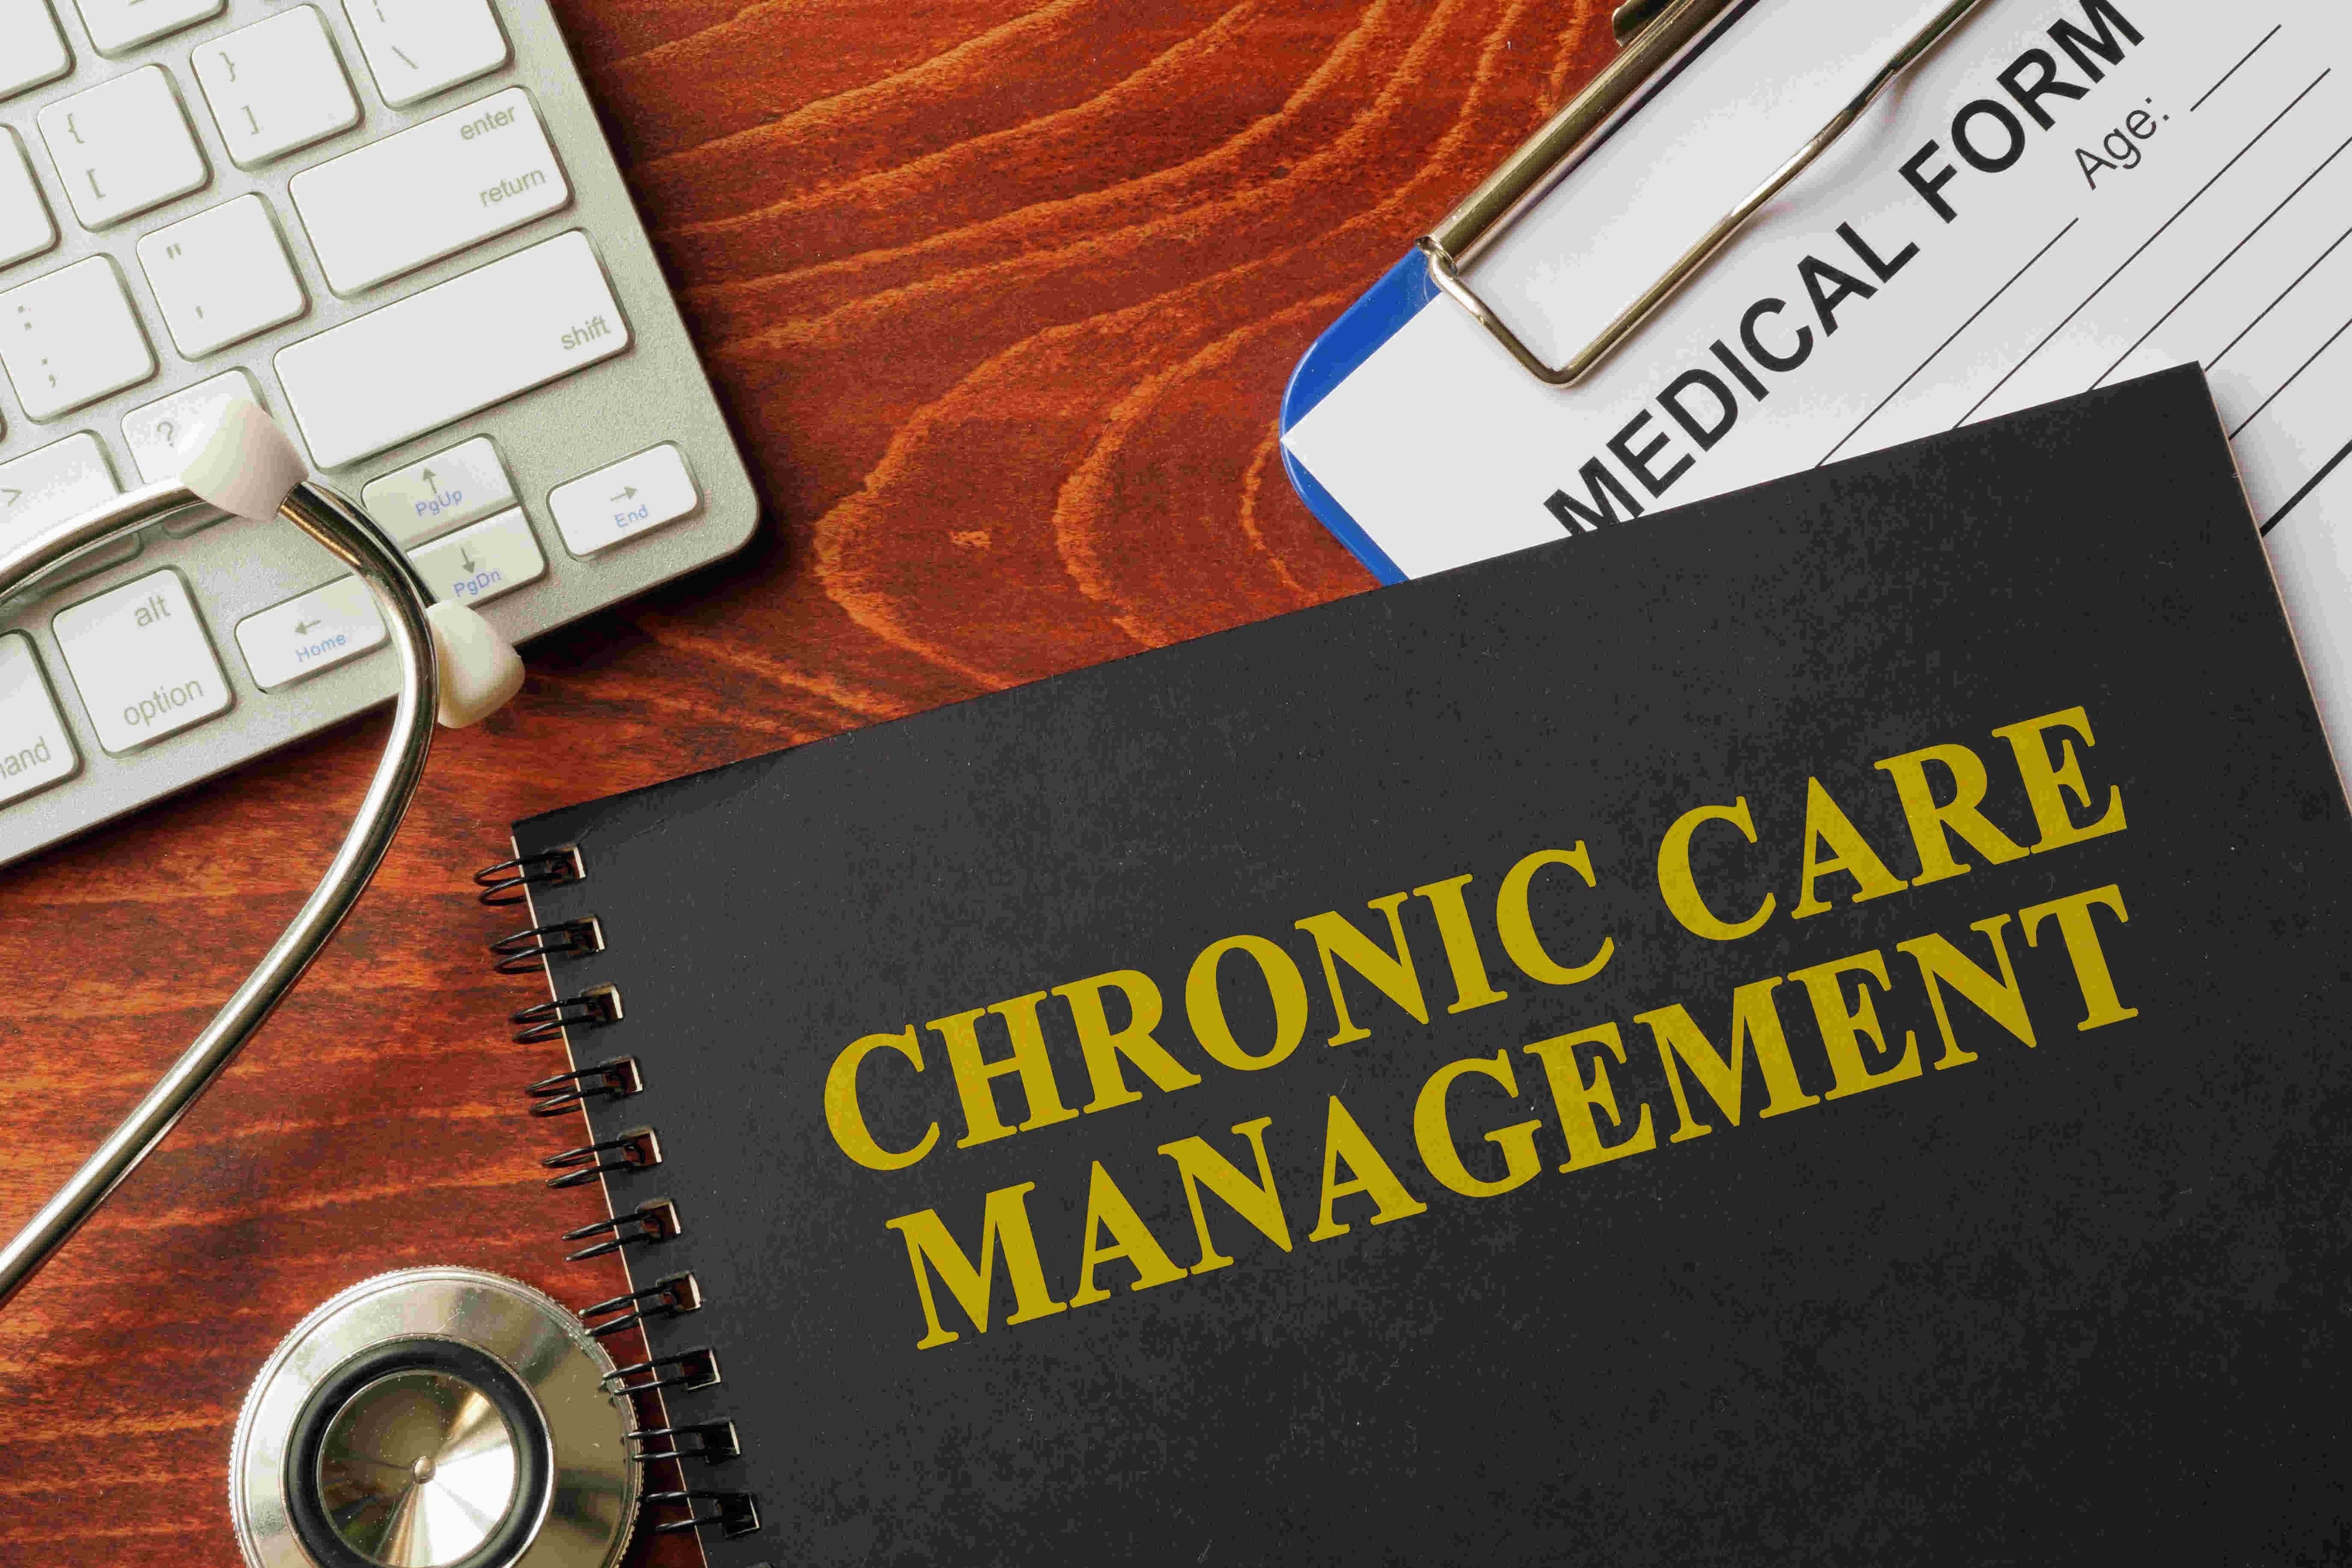 Top administrative challenges of 2023: Care management coding